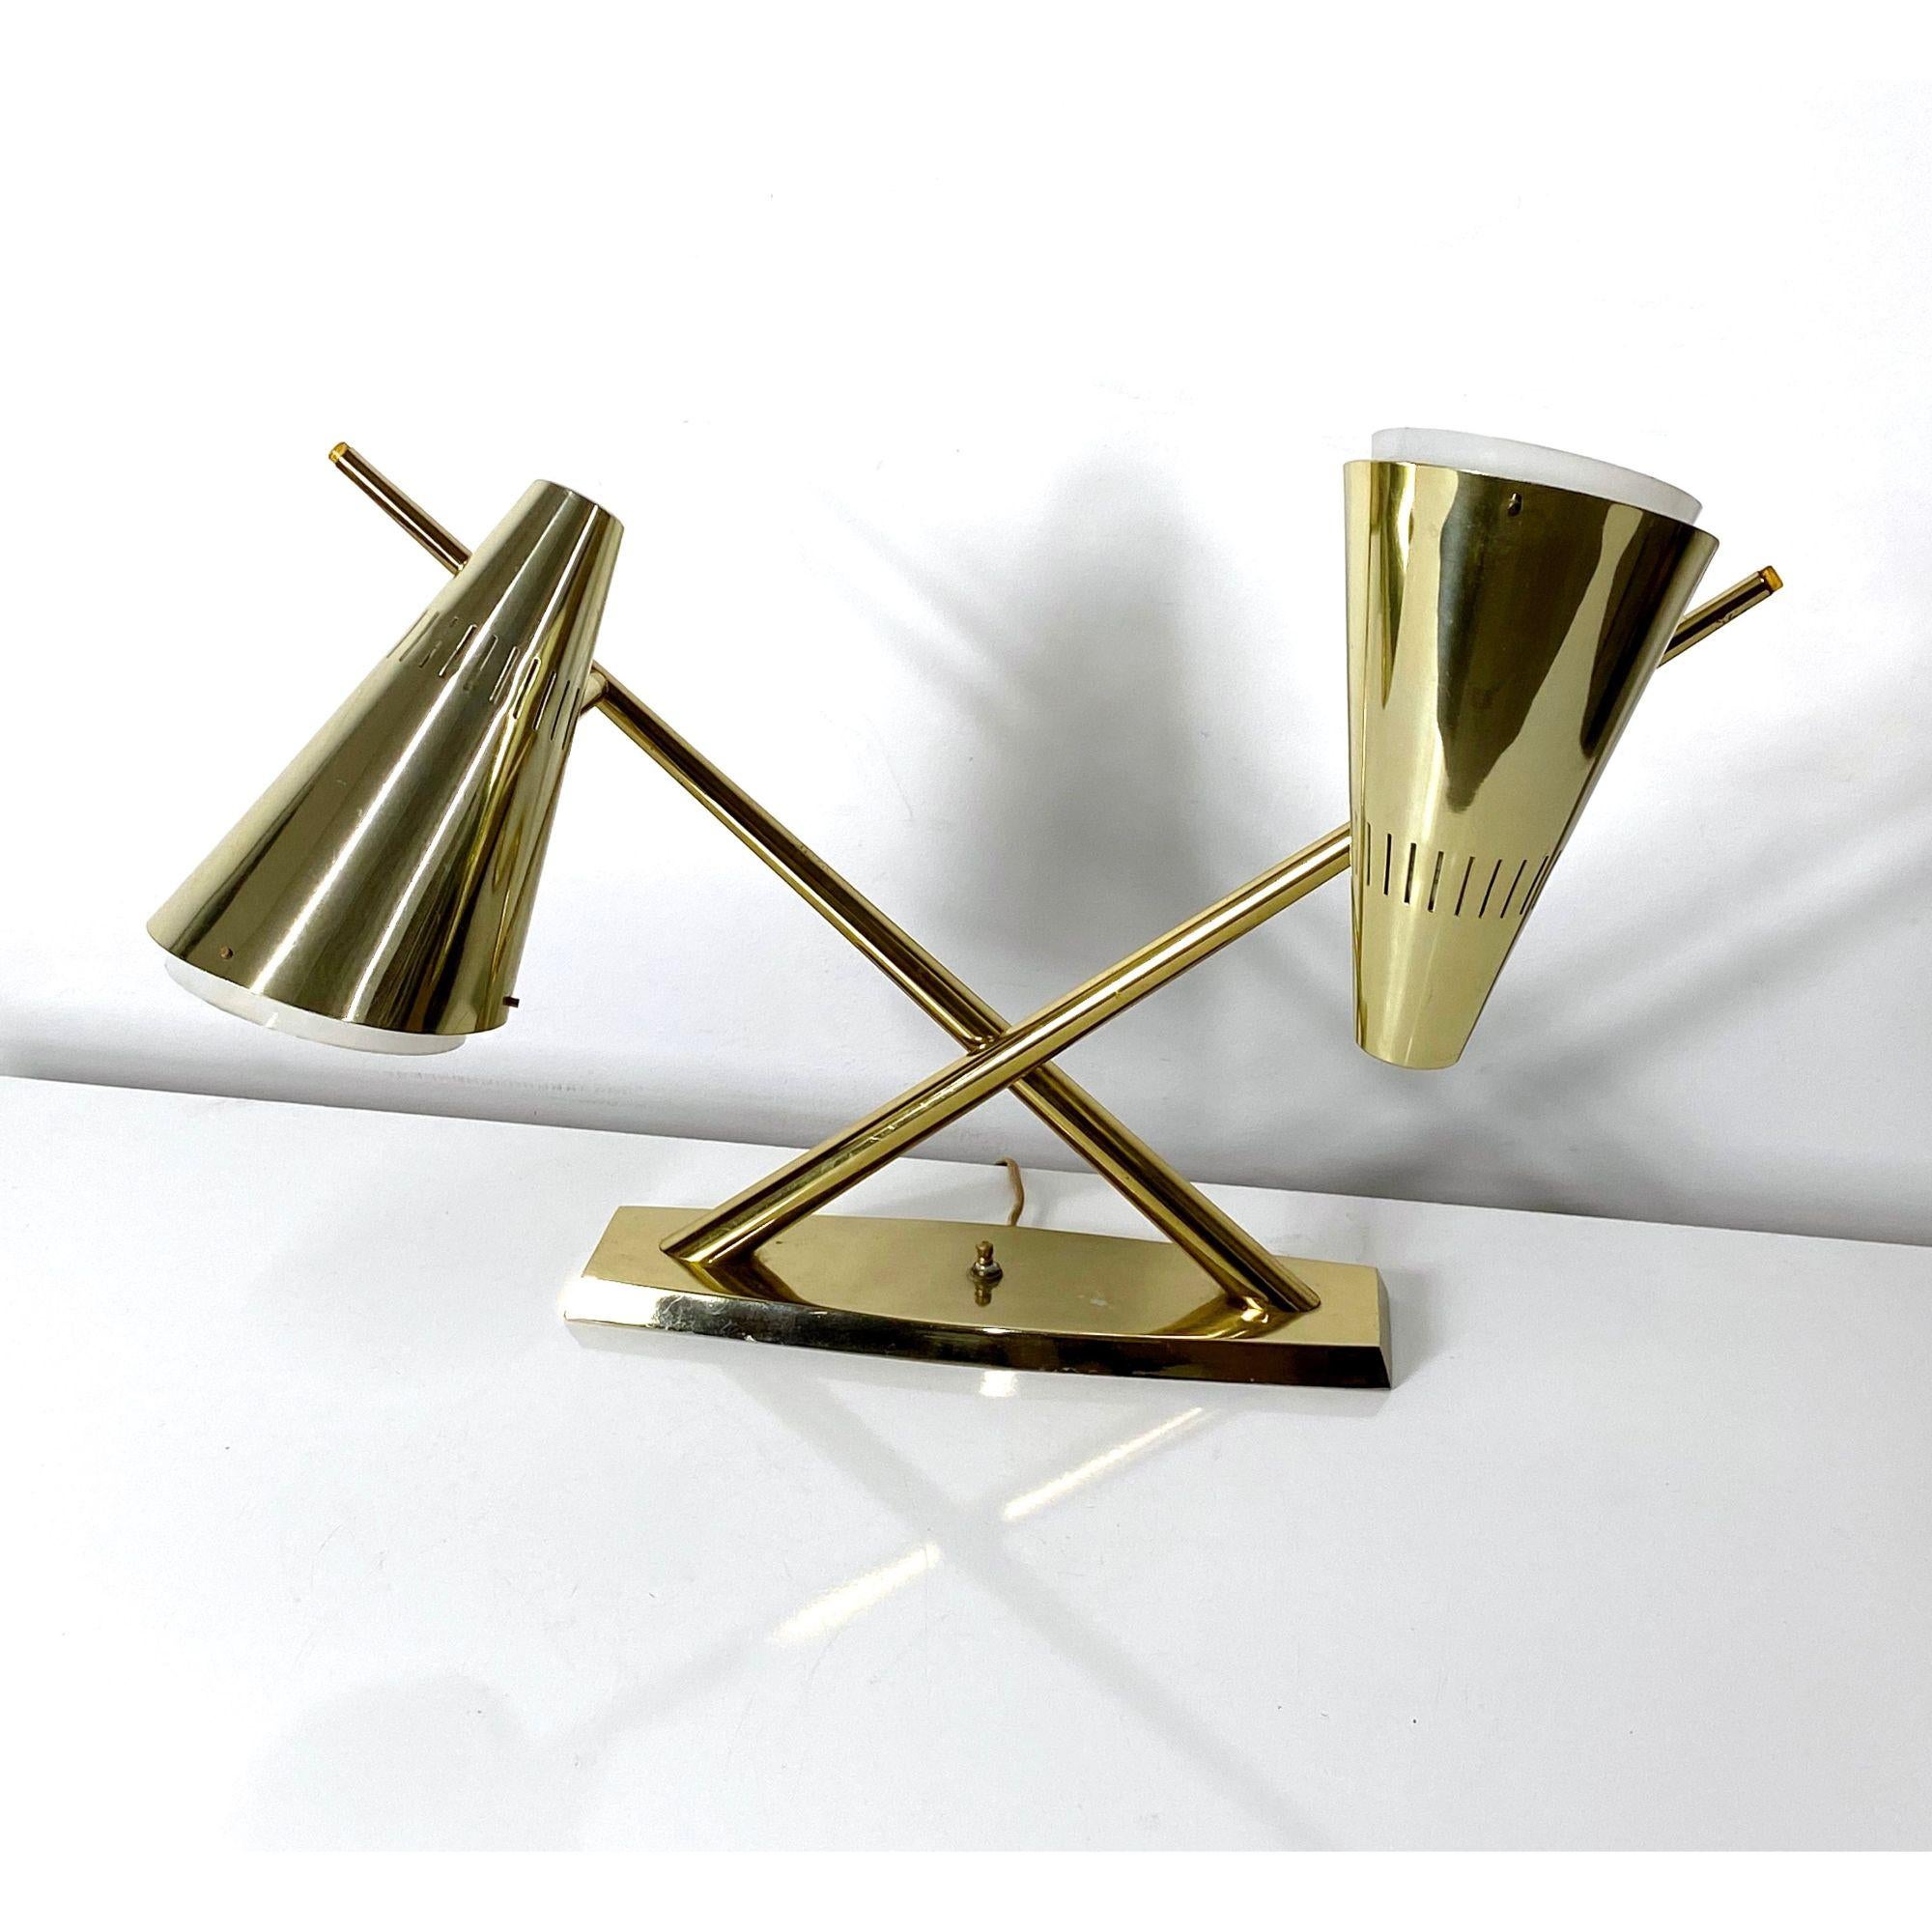 Mid-Century Modern Dual Cone Desk Lamp in Brass and Glass  by Laurel Lamos, circa 1960s